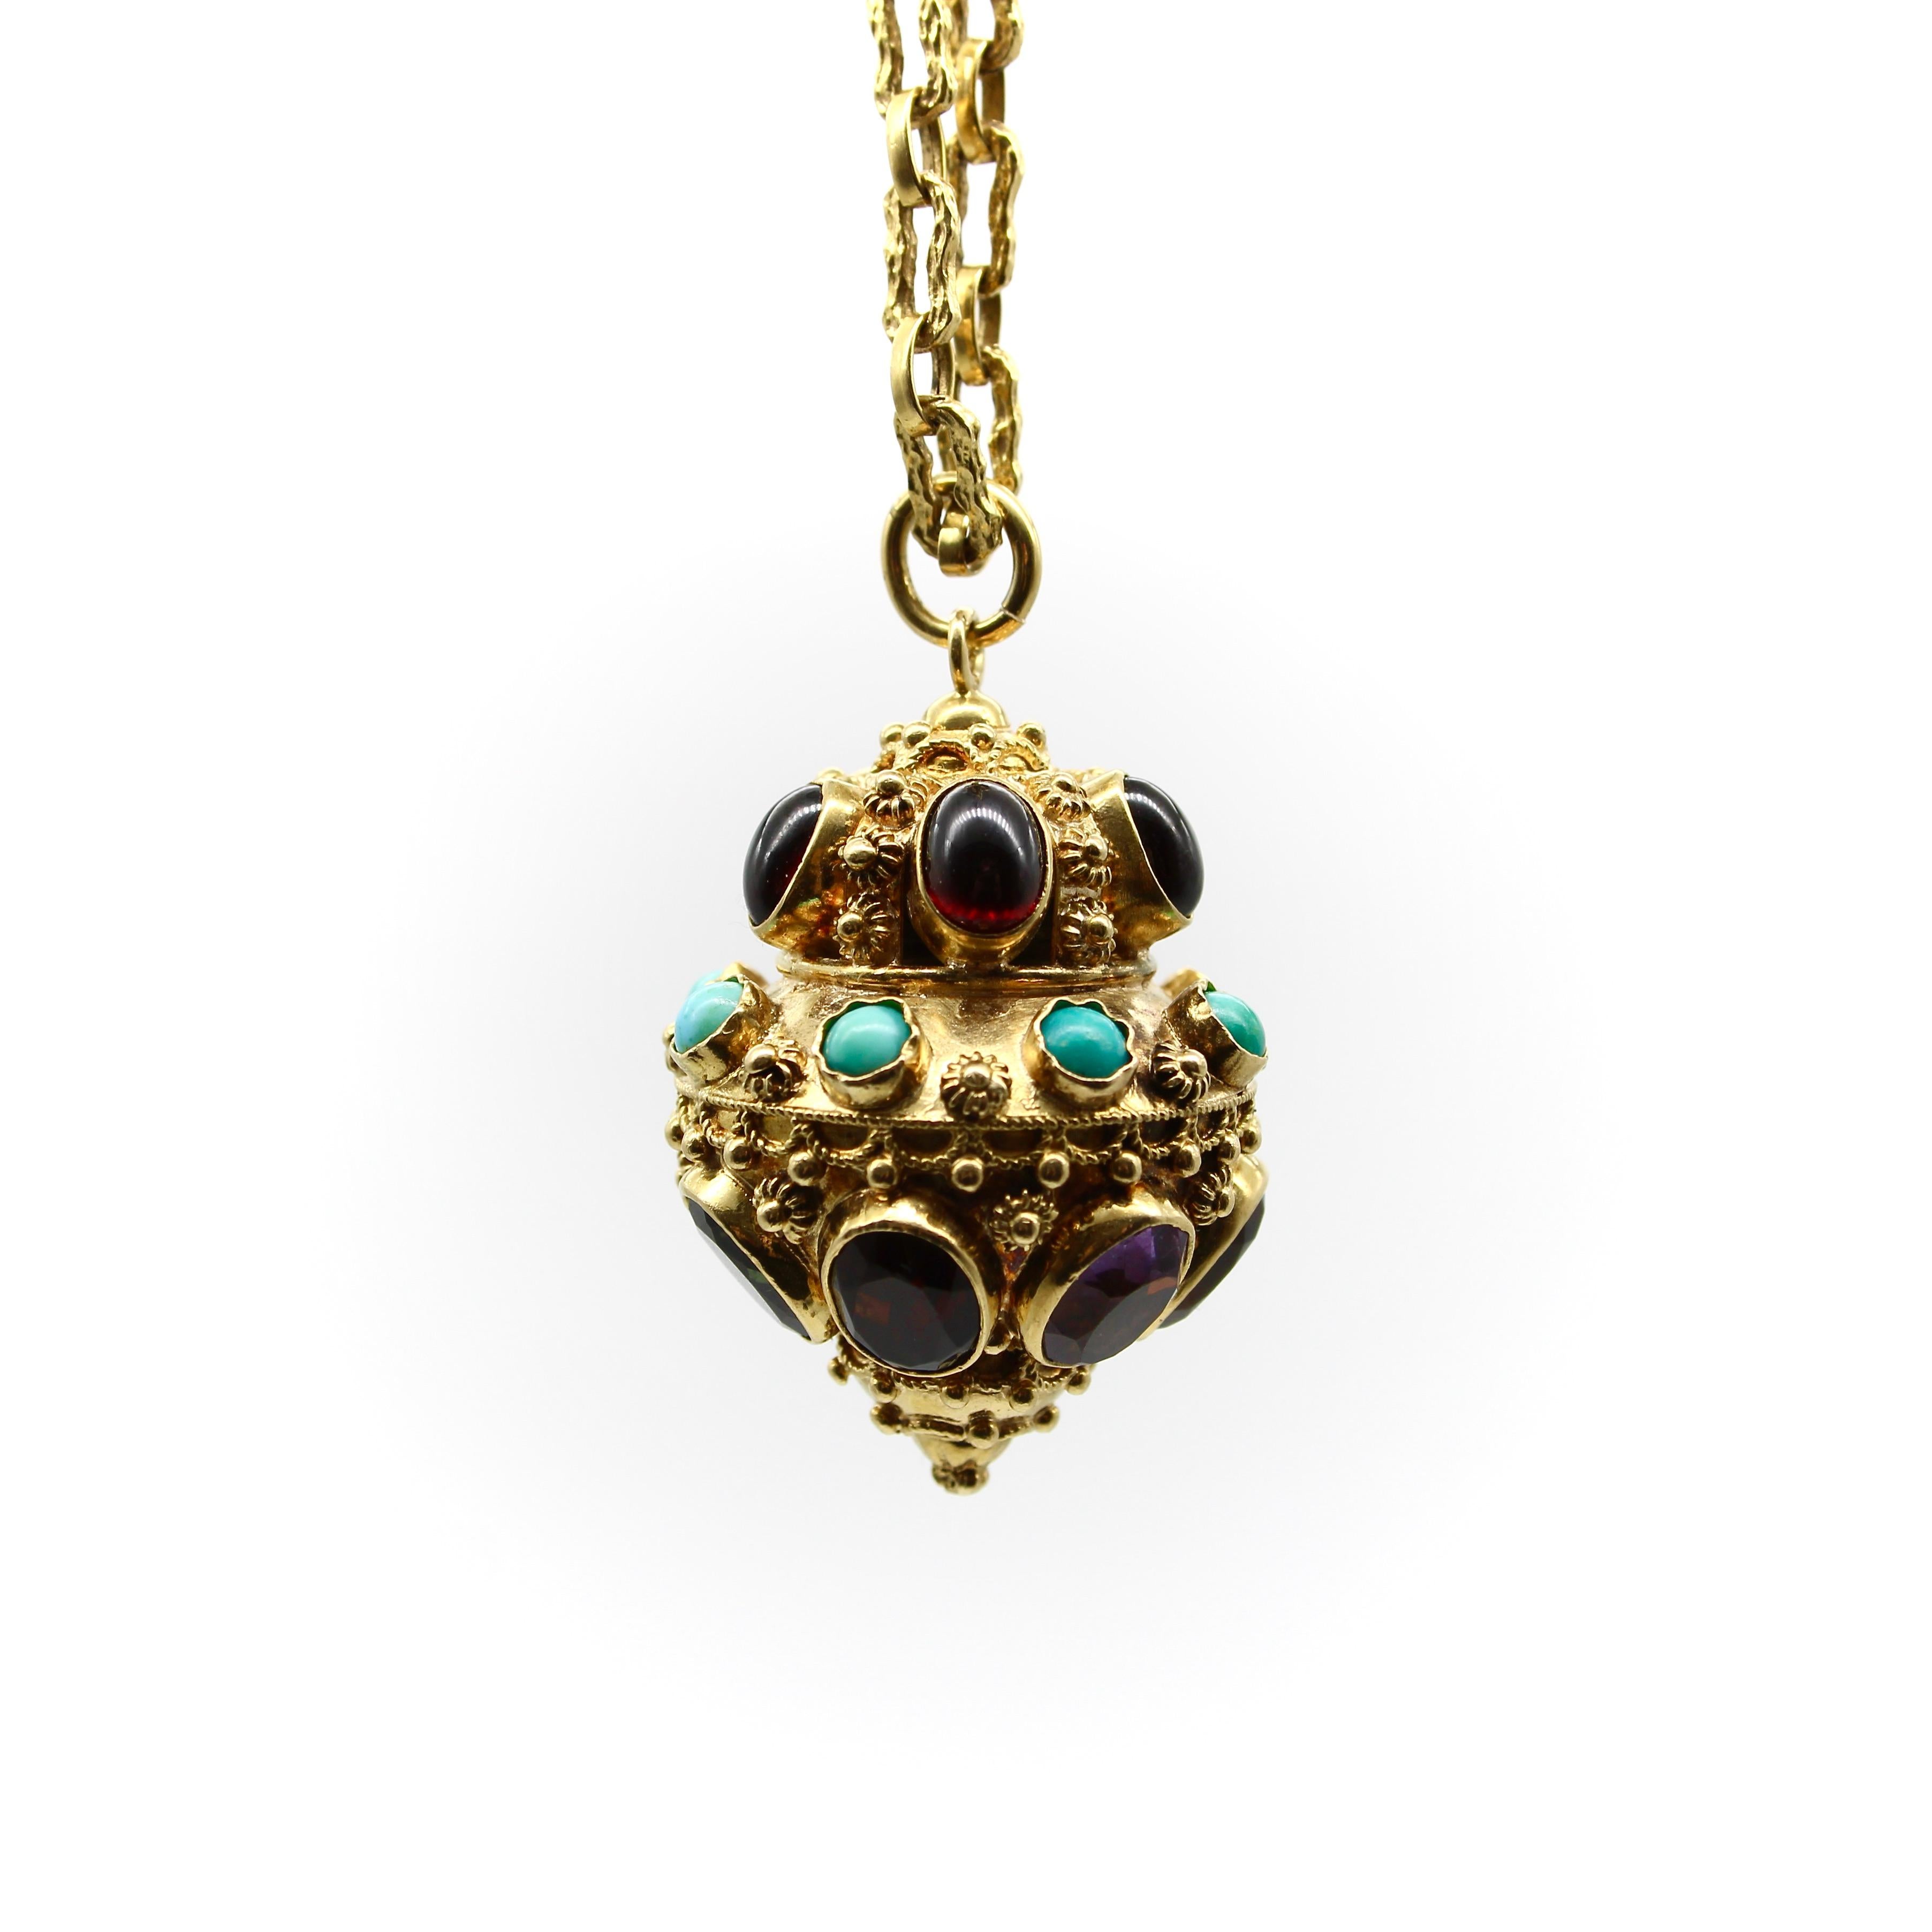 This vintage 18k gold Italian lantern charm is encrusted with citrine, amethyst, garnet, tourmaline and turquoise, bezel set among Etruscan Revival wirework and granulation. The ornate vintage piece was most likely first purchased at the Ponte